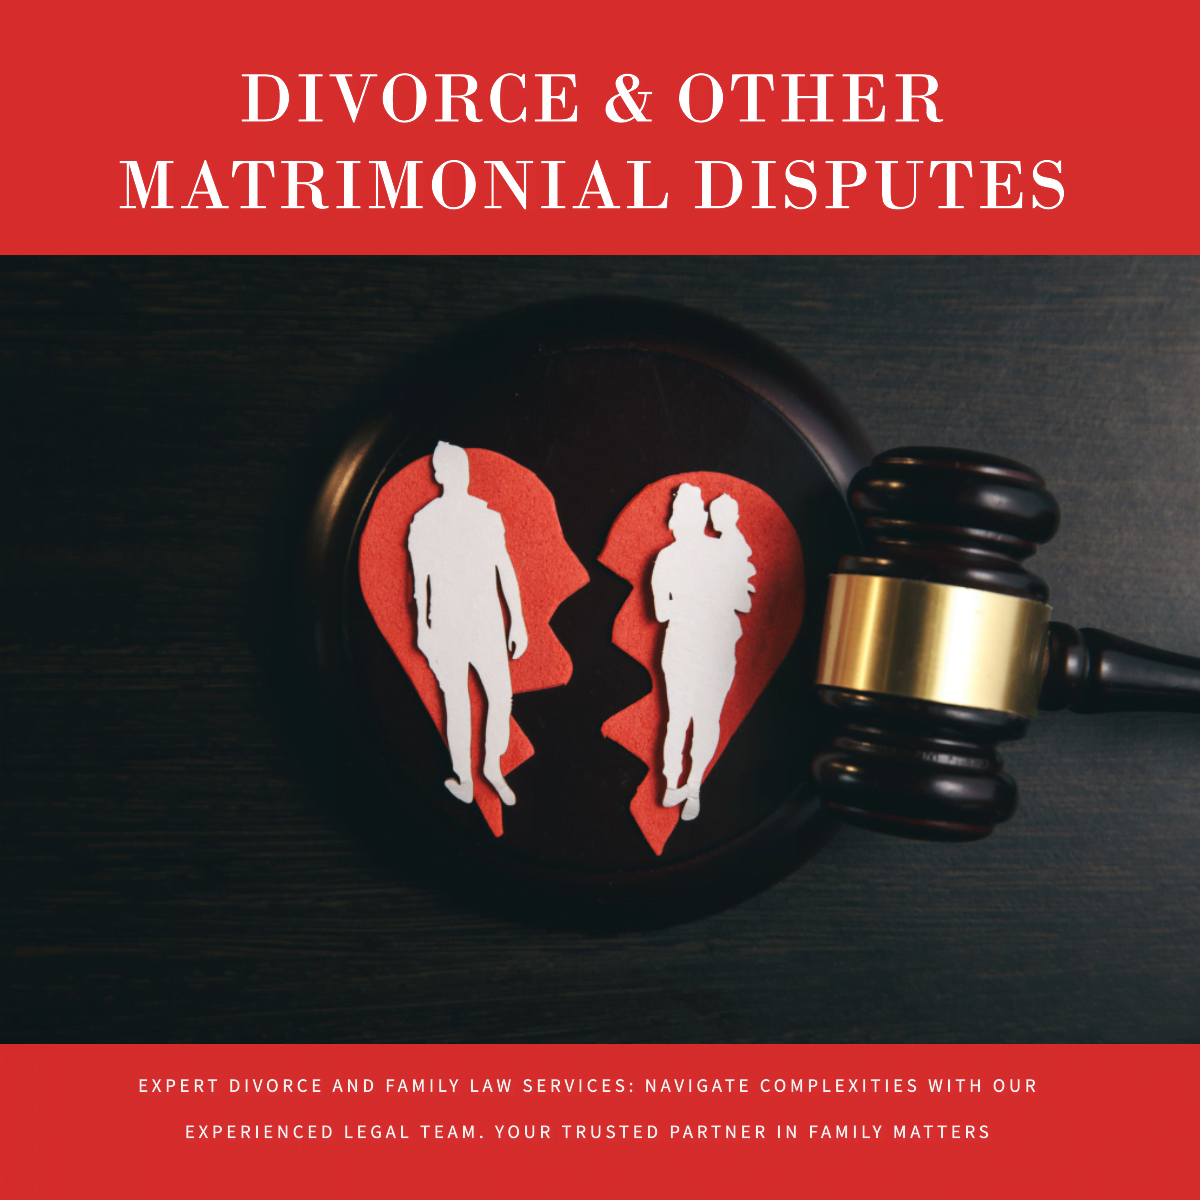 Divorce and Family Law Services